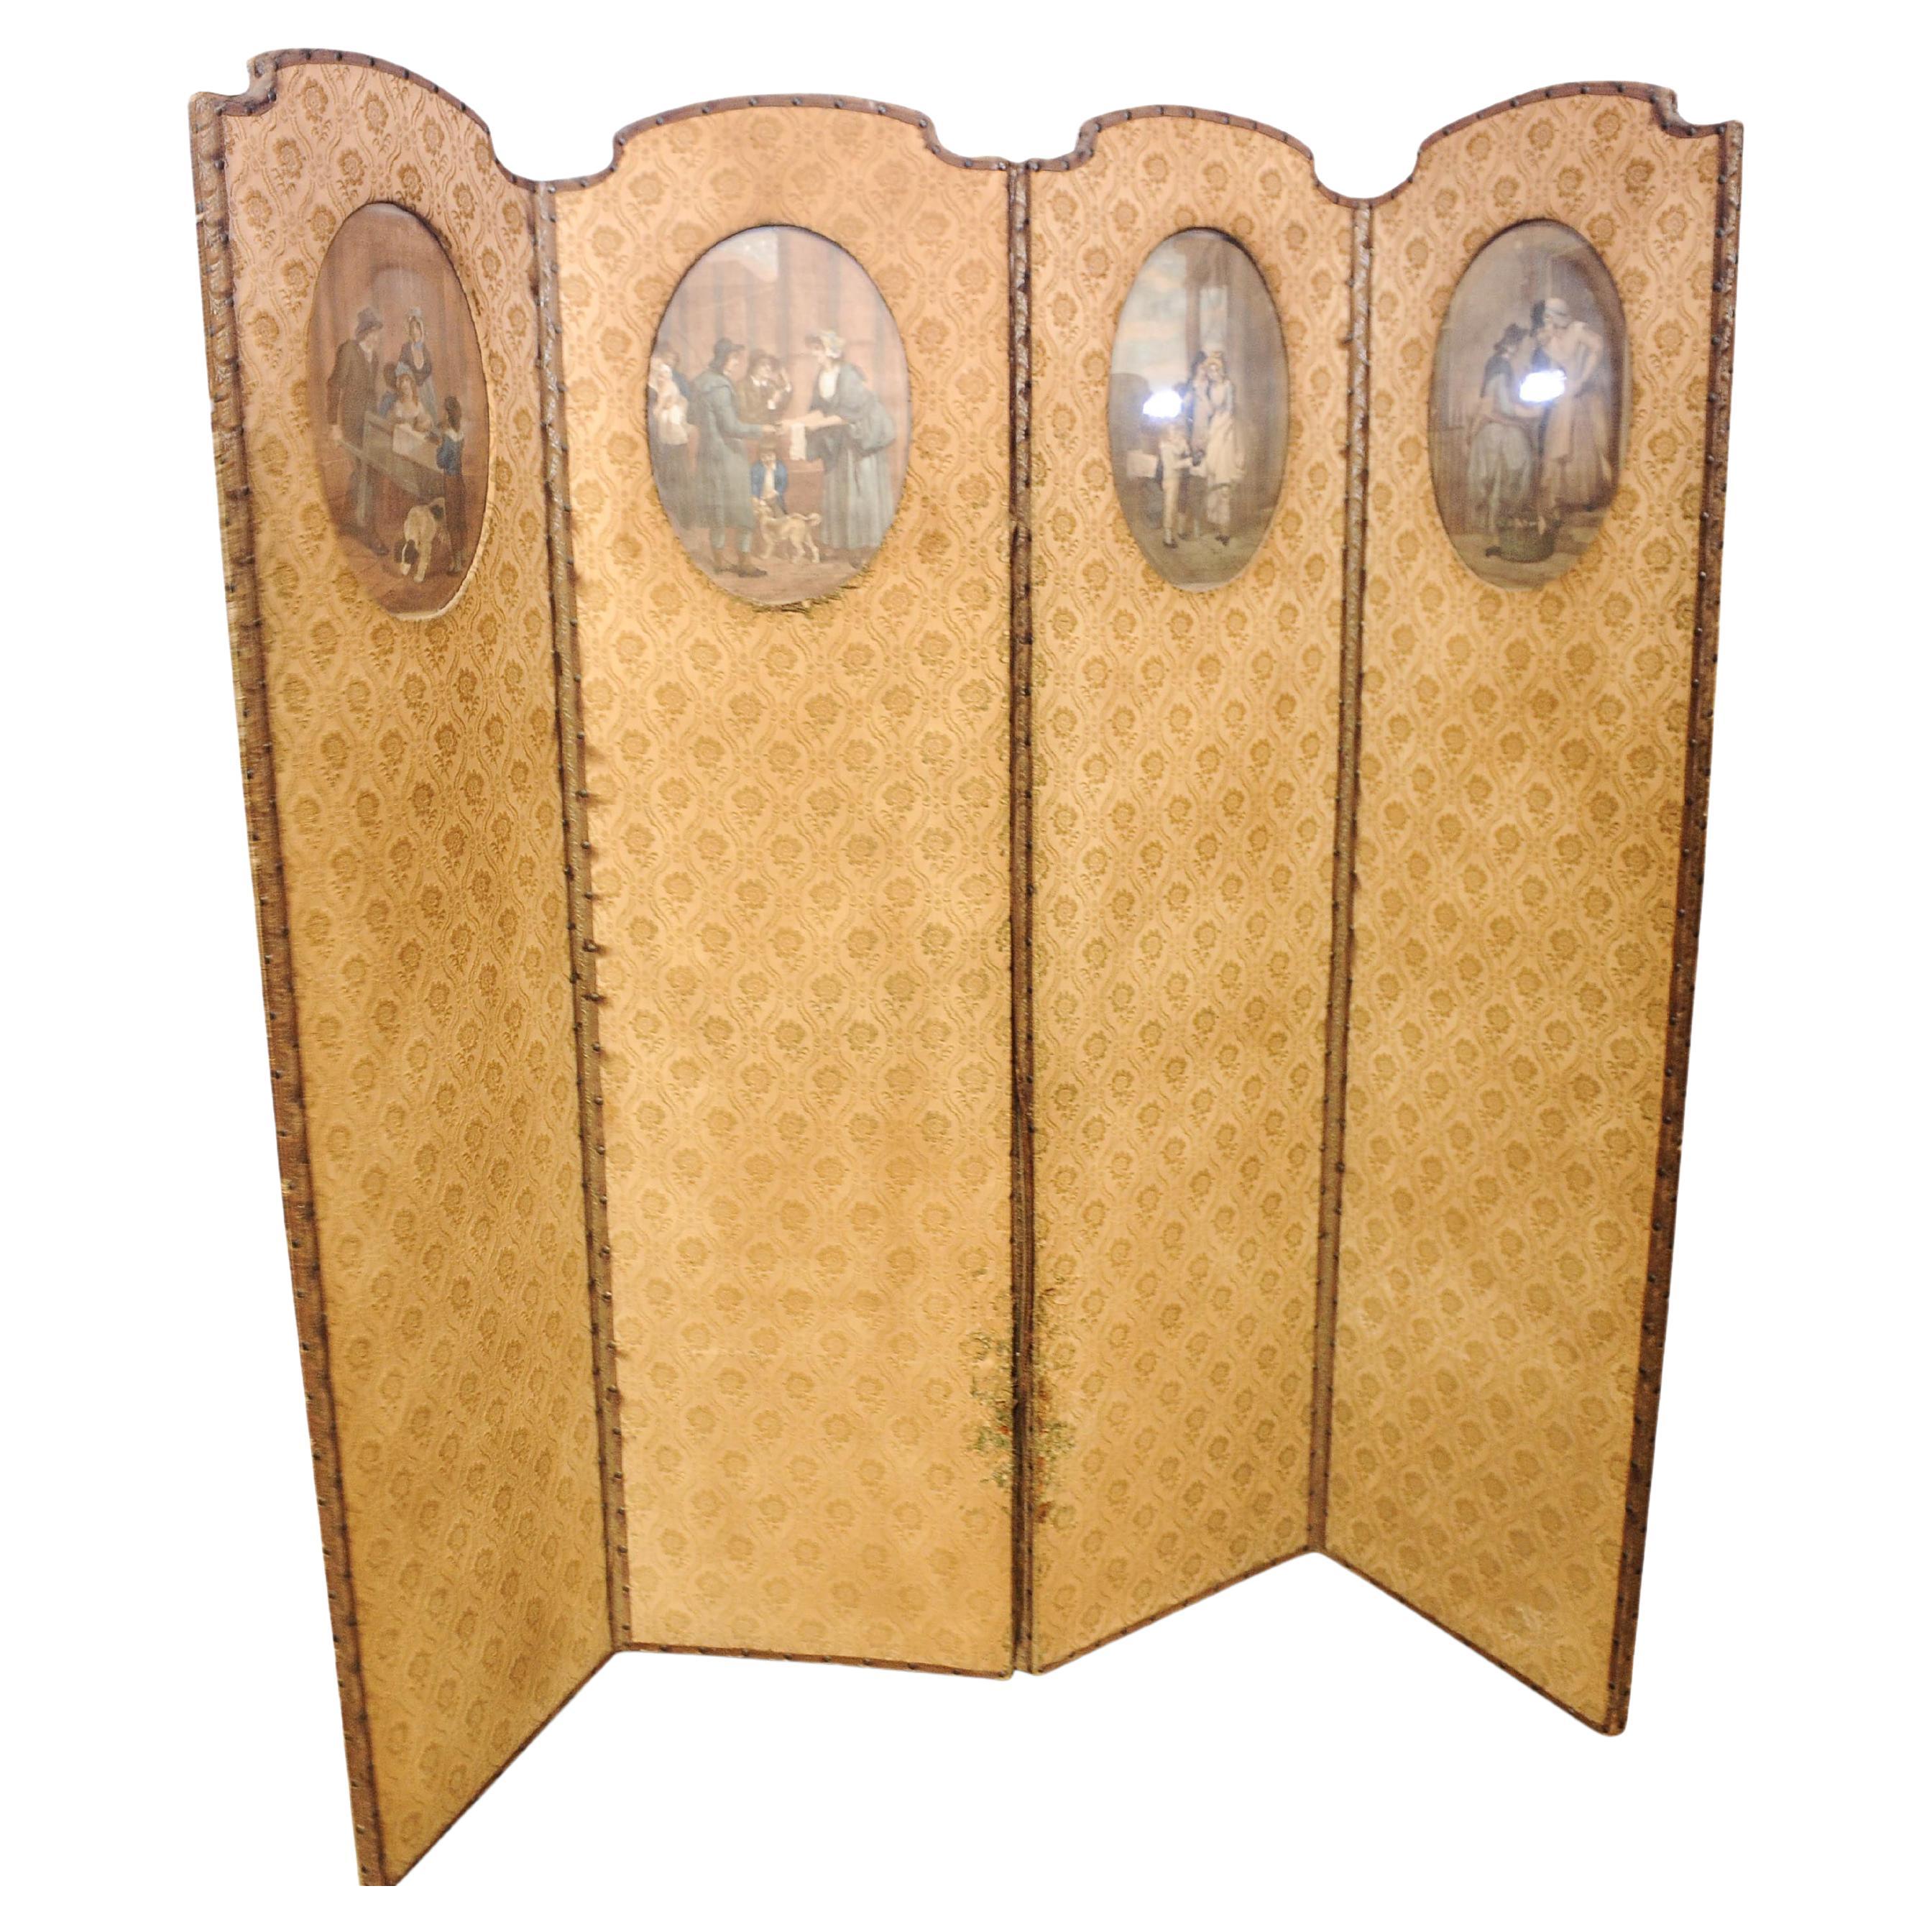 A Rare Find A Georgian Upholstered Four Fold Room Divider Boudoir Screen  For Sale